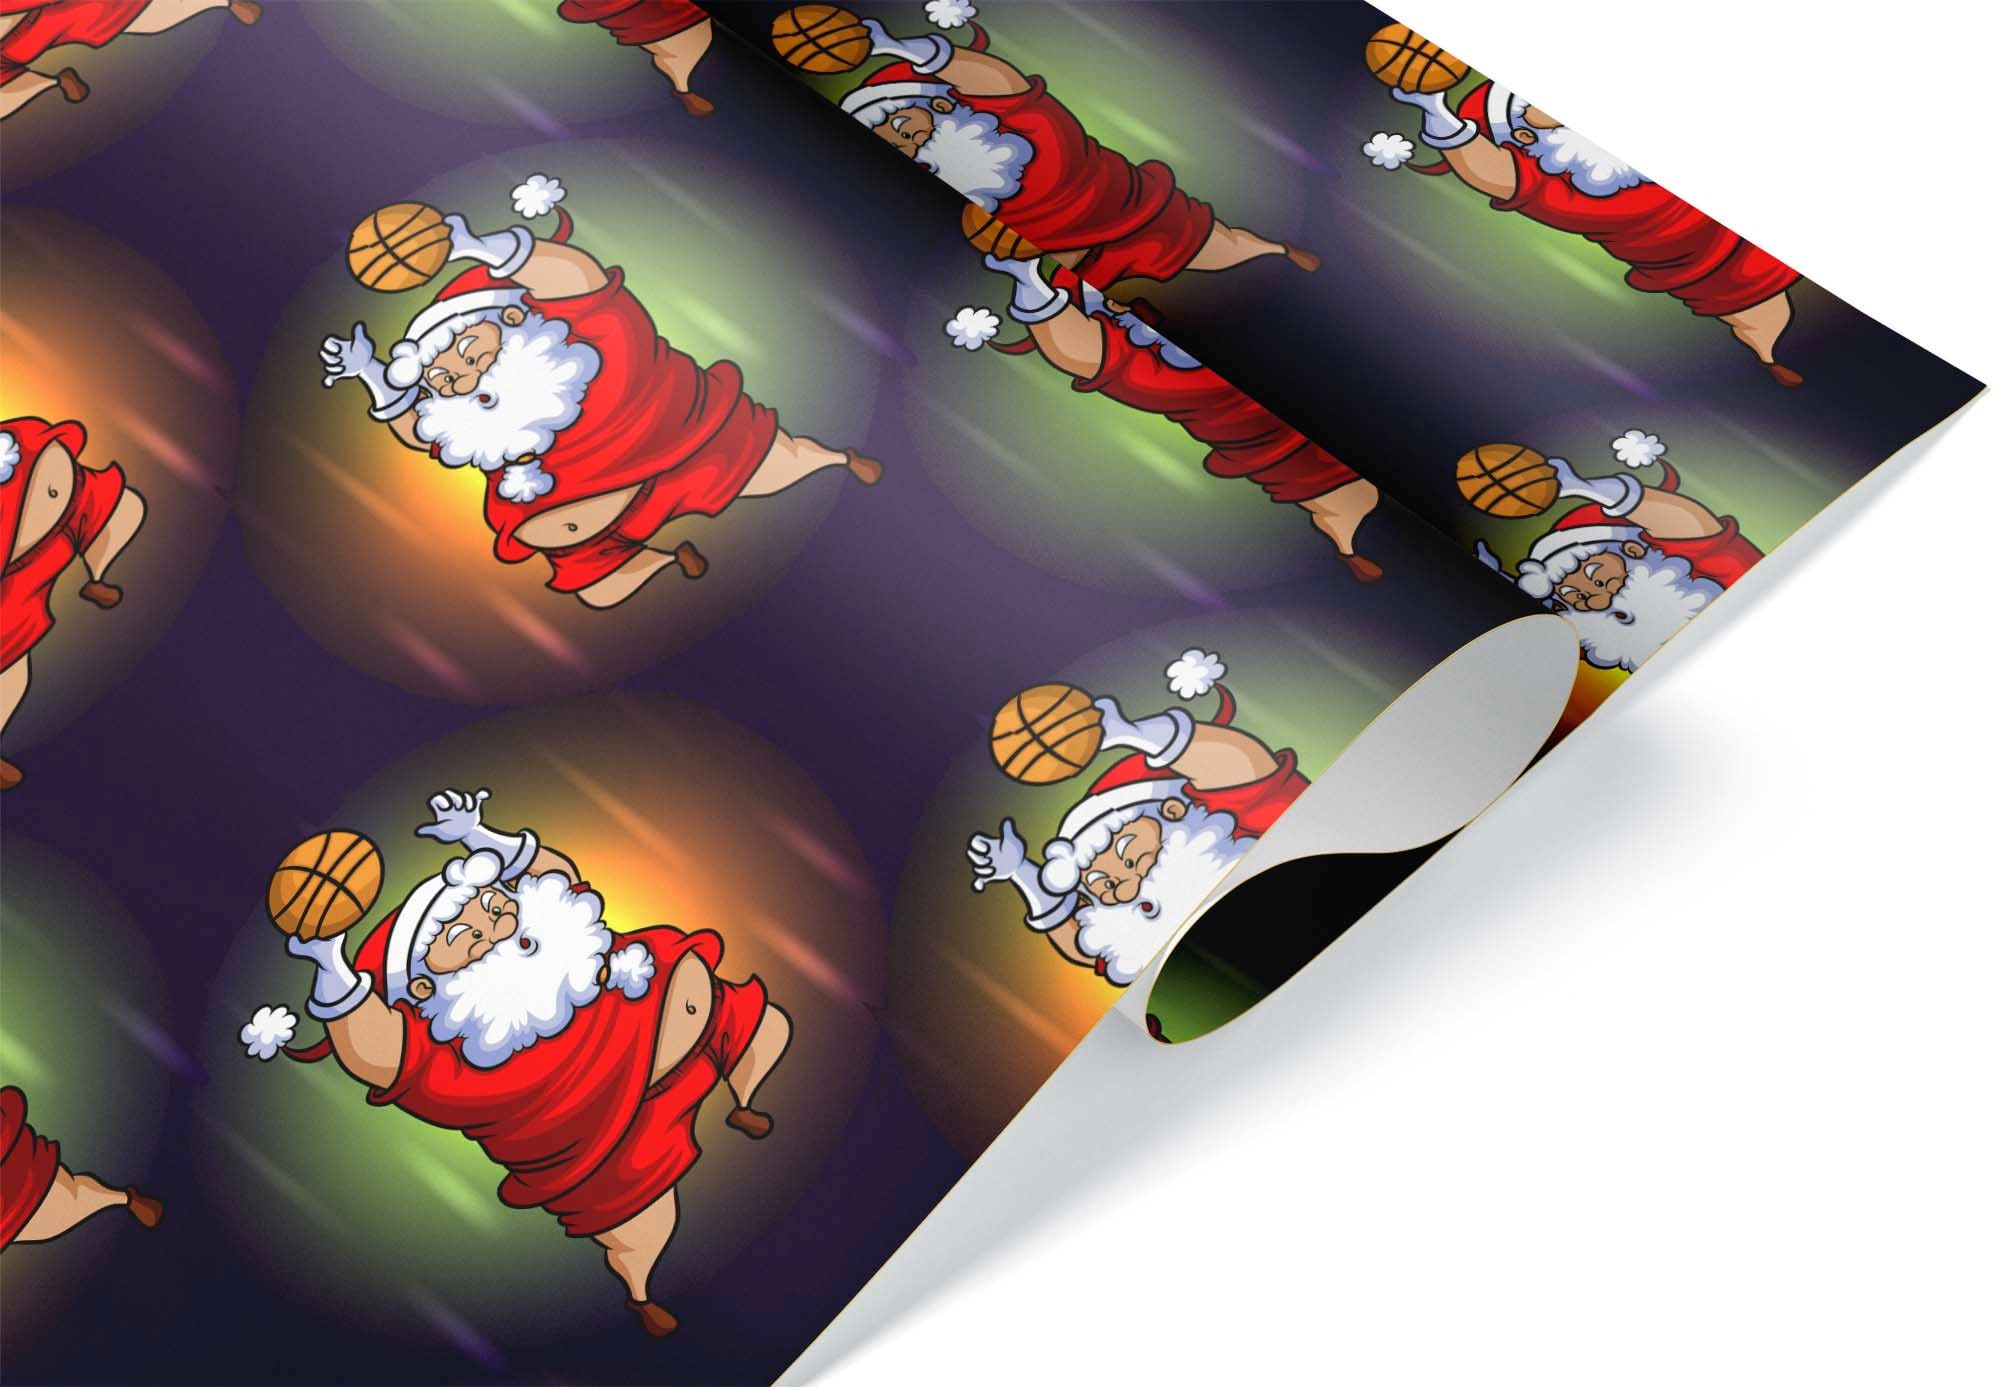 Funny Santa Soccer Gift Wrap, Thick Wrapping Paper, Futsal Ball Christmas  Present, Sport Party Decoration 